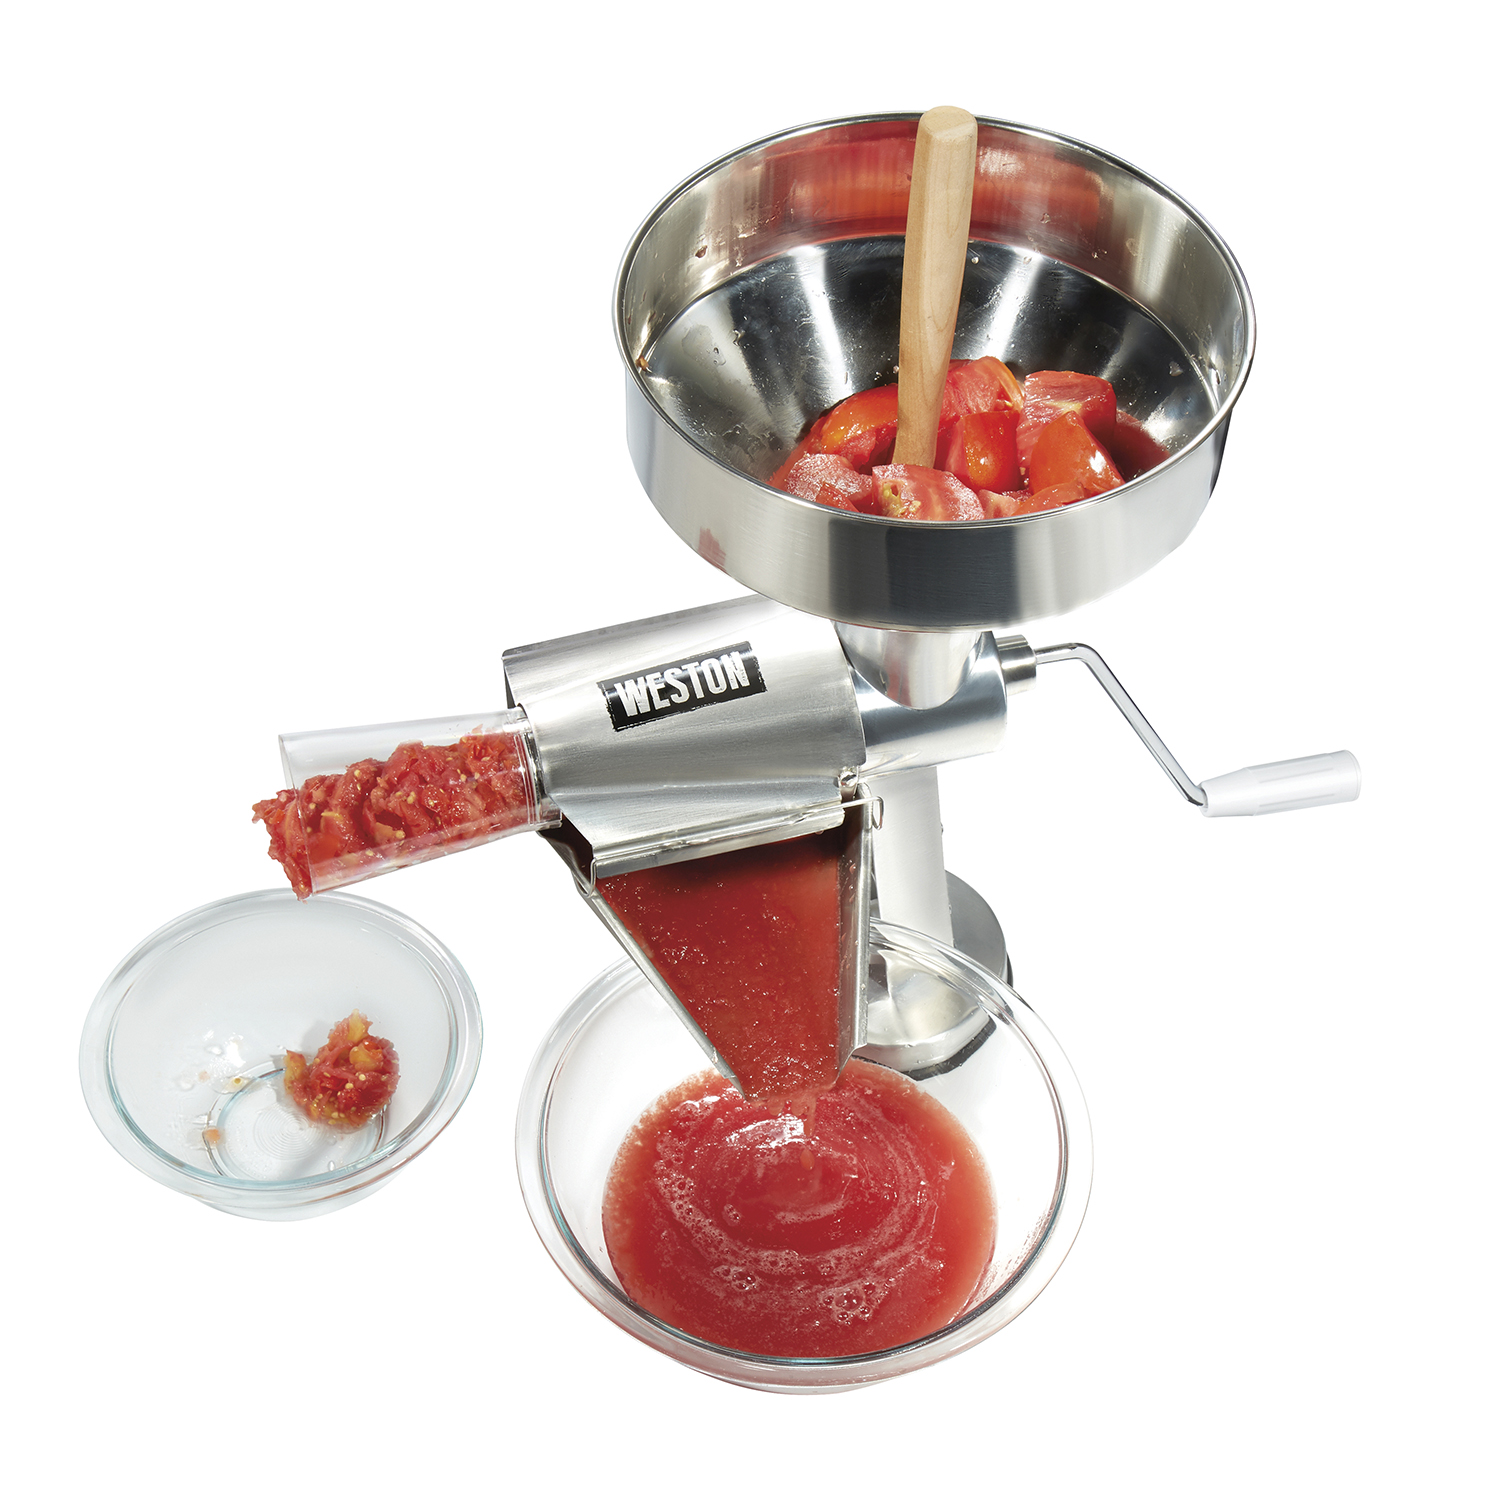  Weston Food Strainer and Sauce Maker for Tomato, Fresh Fruits  and Vegetables ,White